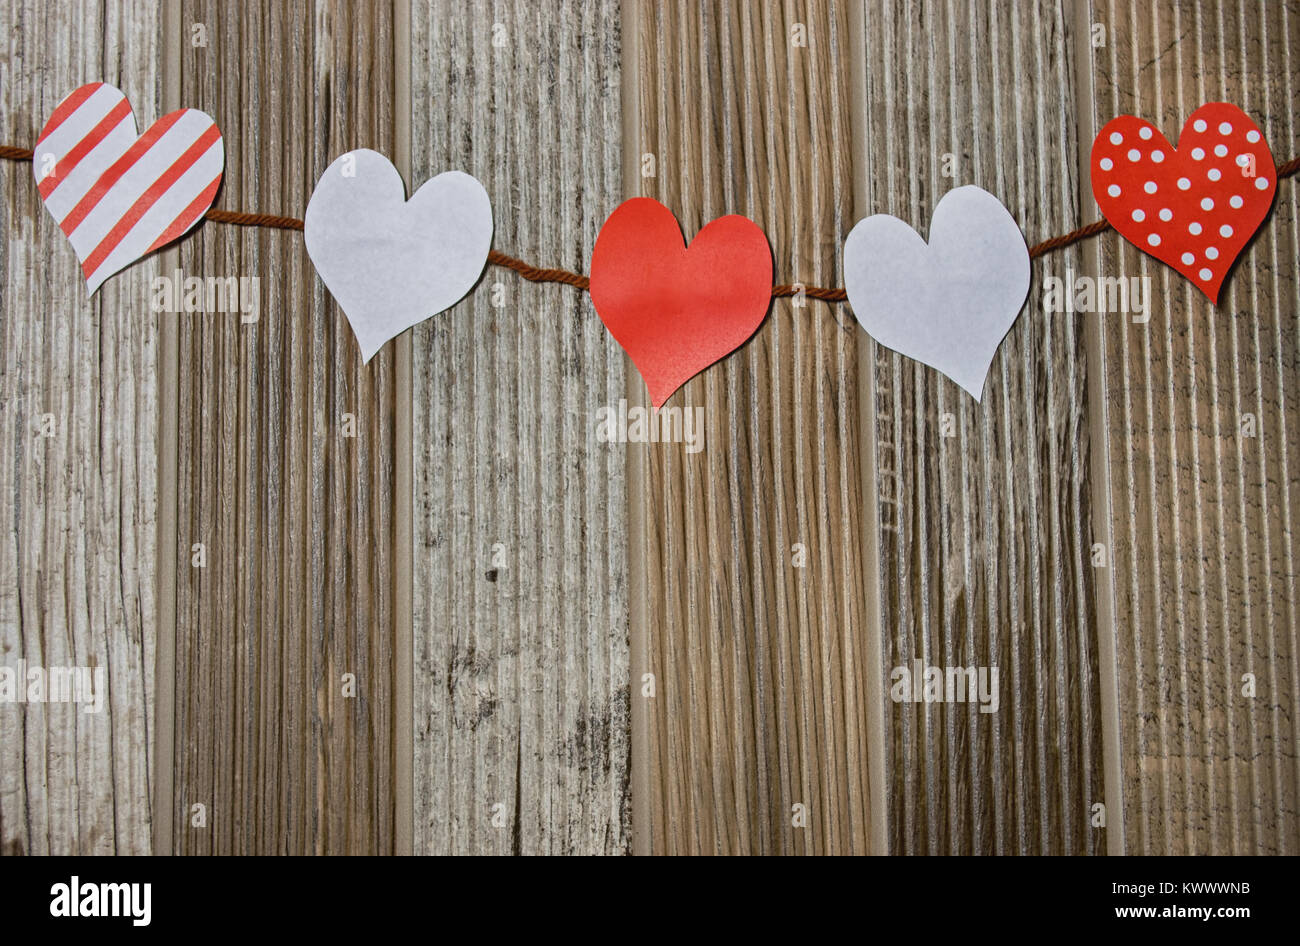 Red and white hearts hanging on a line in front of distressed wood Stock Photo